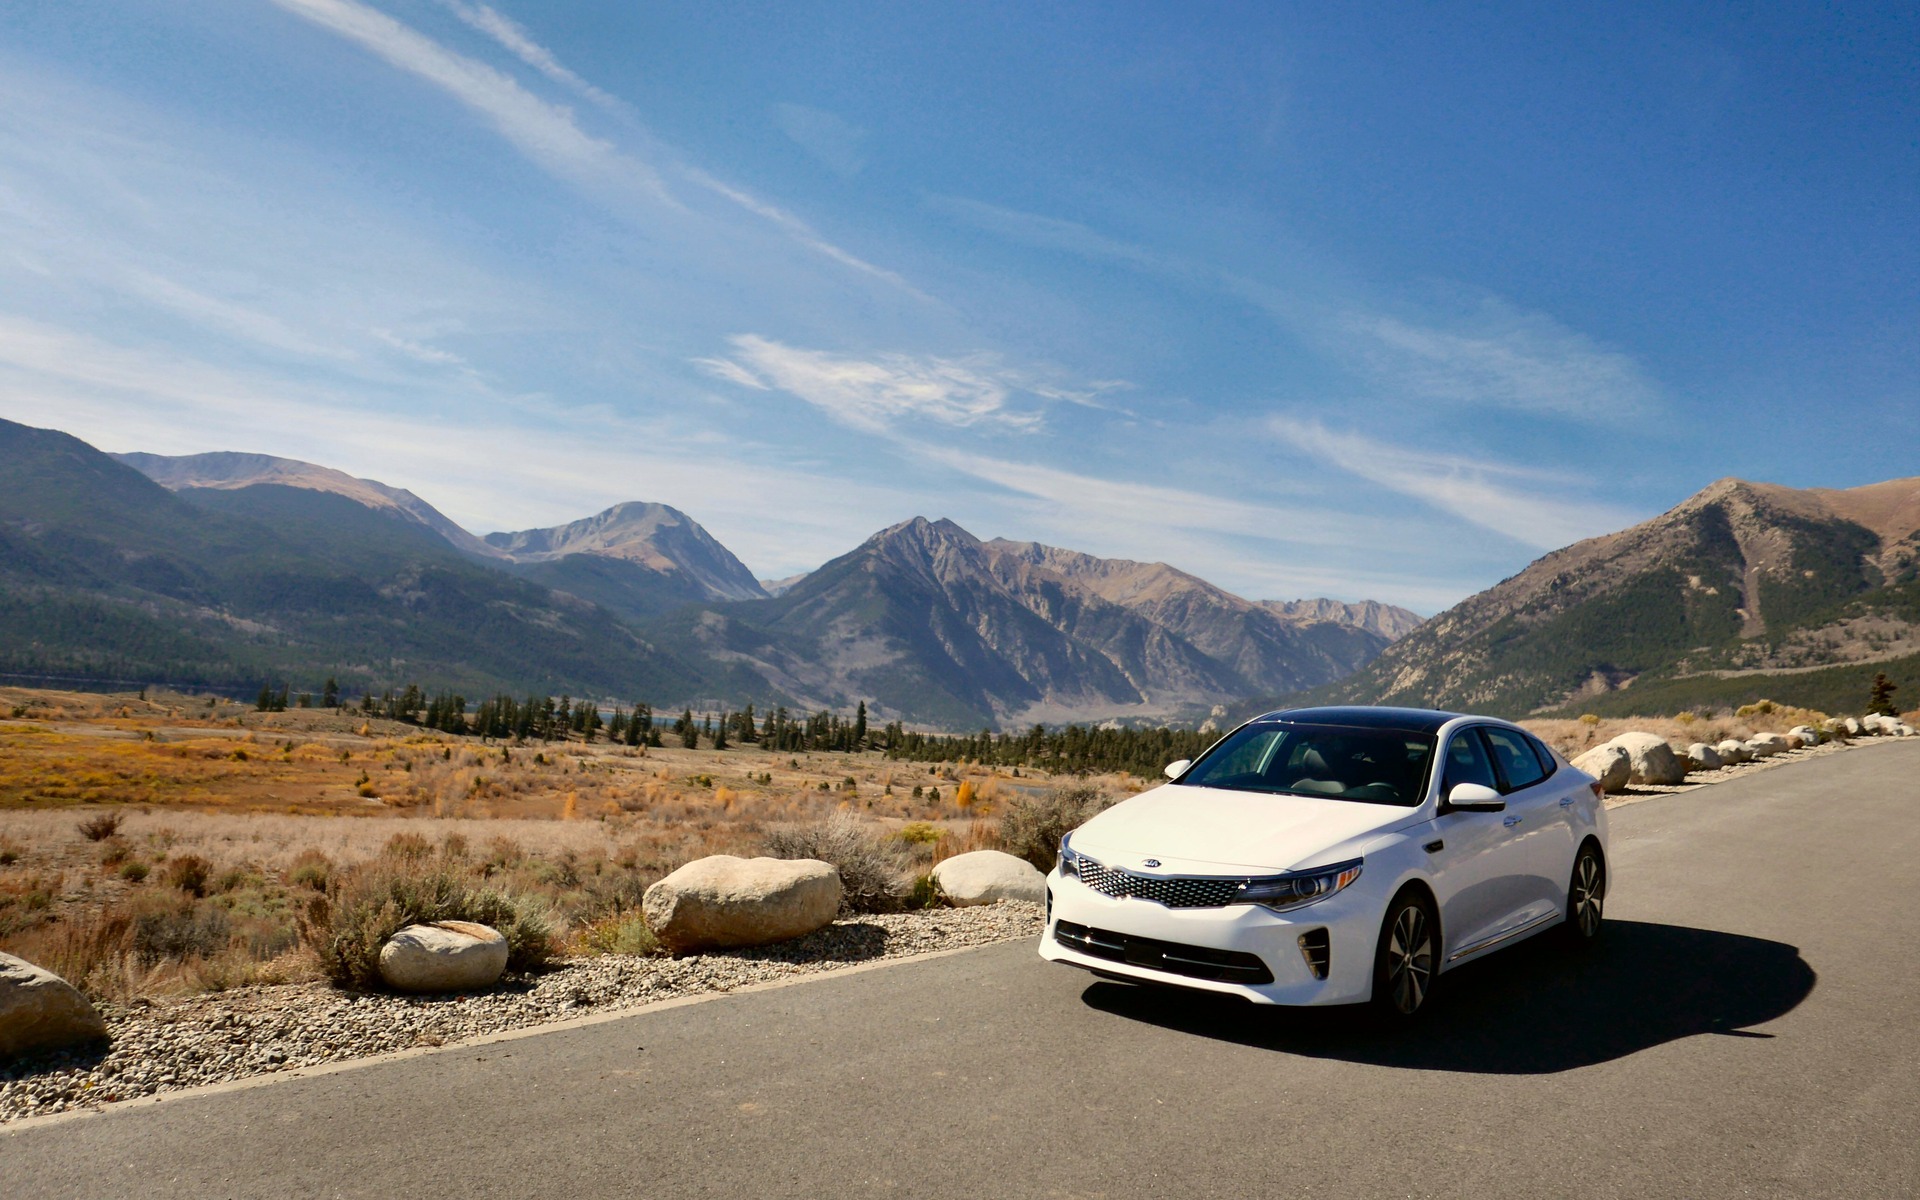 The 2016 Kia Optima's chassis has been optimized for comfortable commuting.